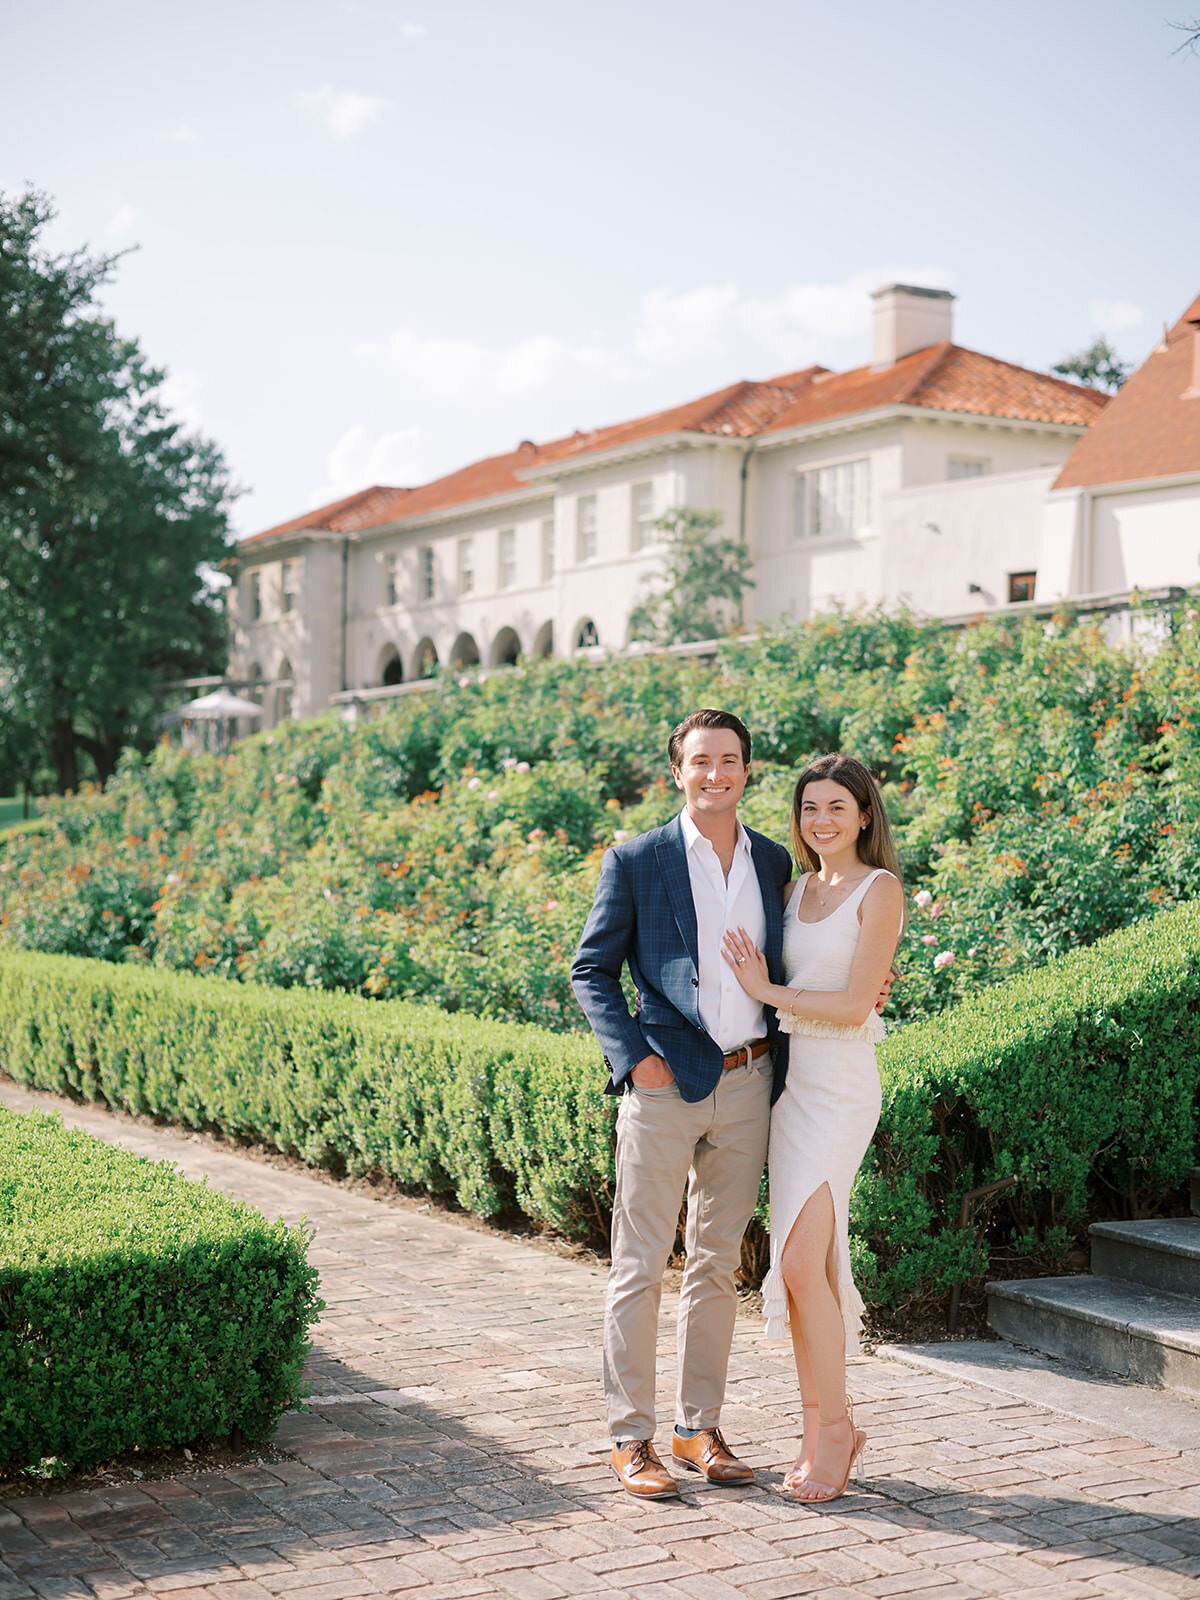 A newly engaged couple poses for a photo in The Commodore Perry Estate's gardens